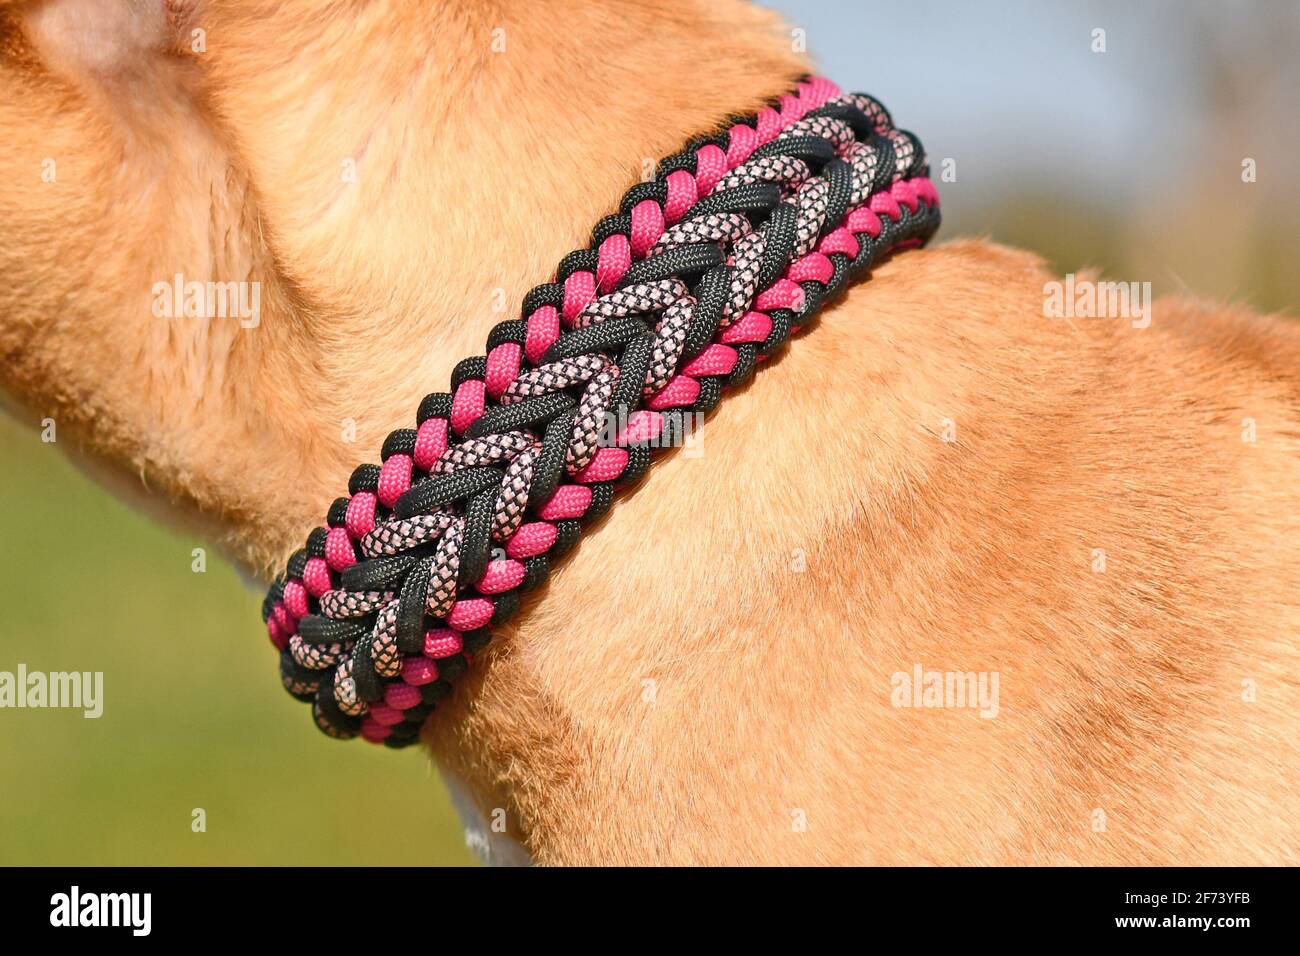 Close up of handmade woven dog collar made from paracord material on neck  of red dog Stock Photo - Alamy